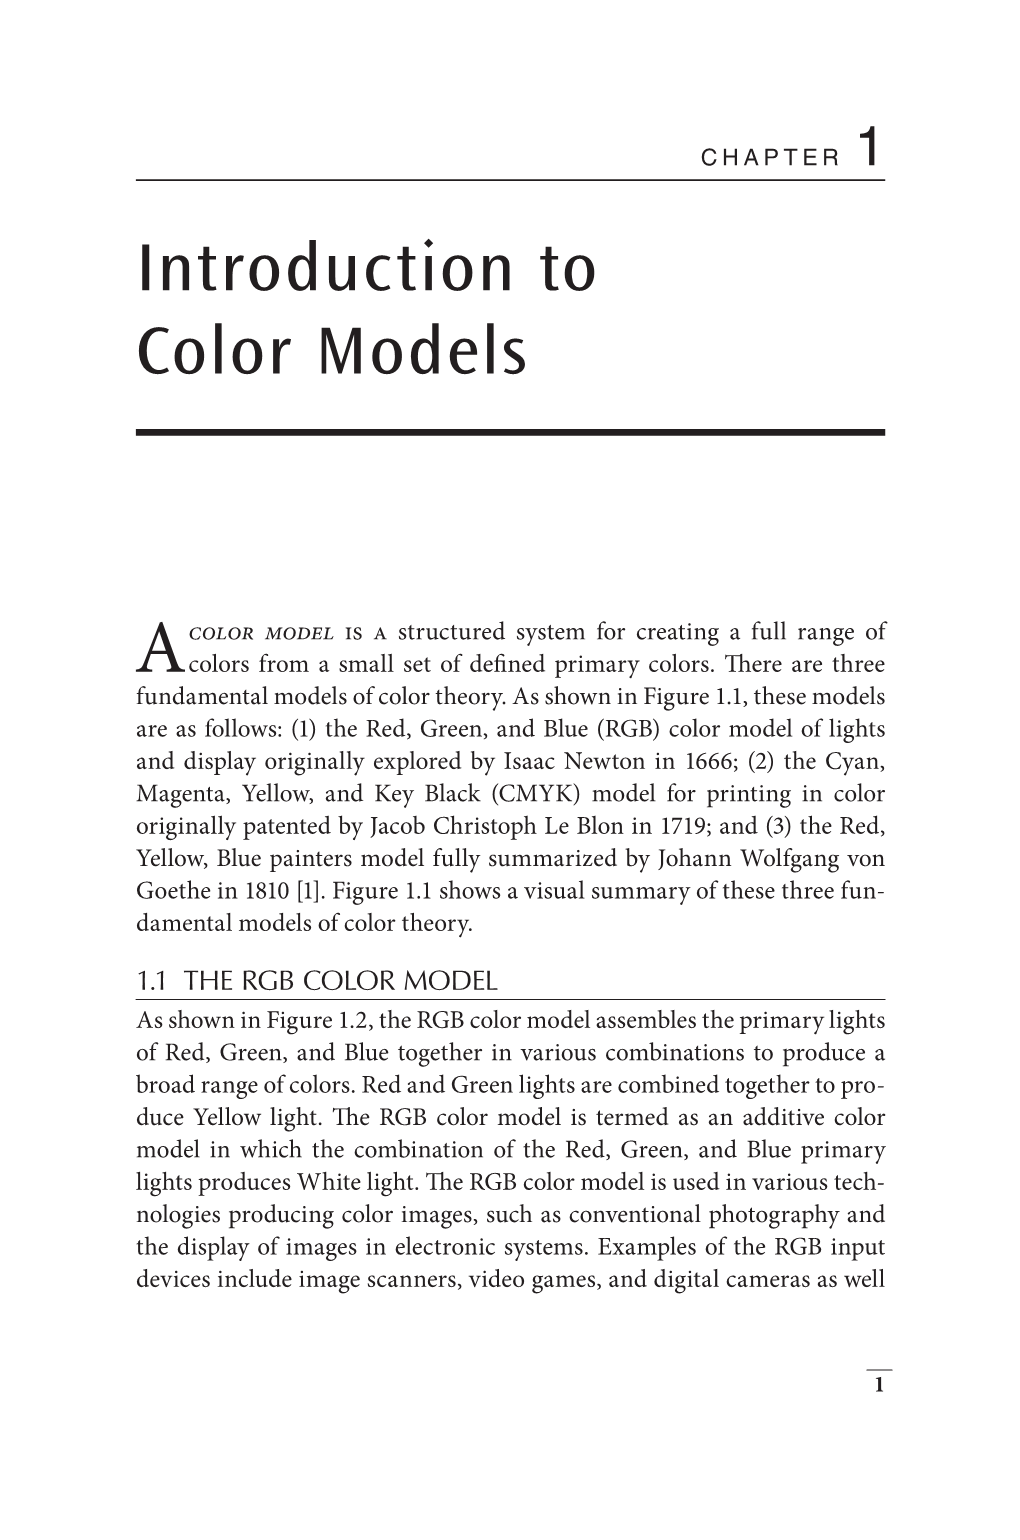 Introduction to Color Models